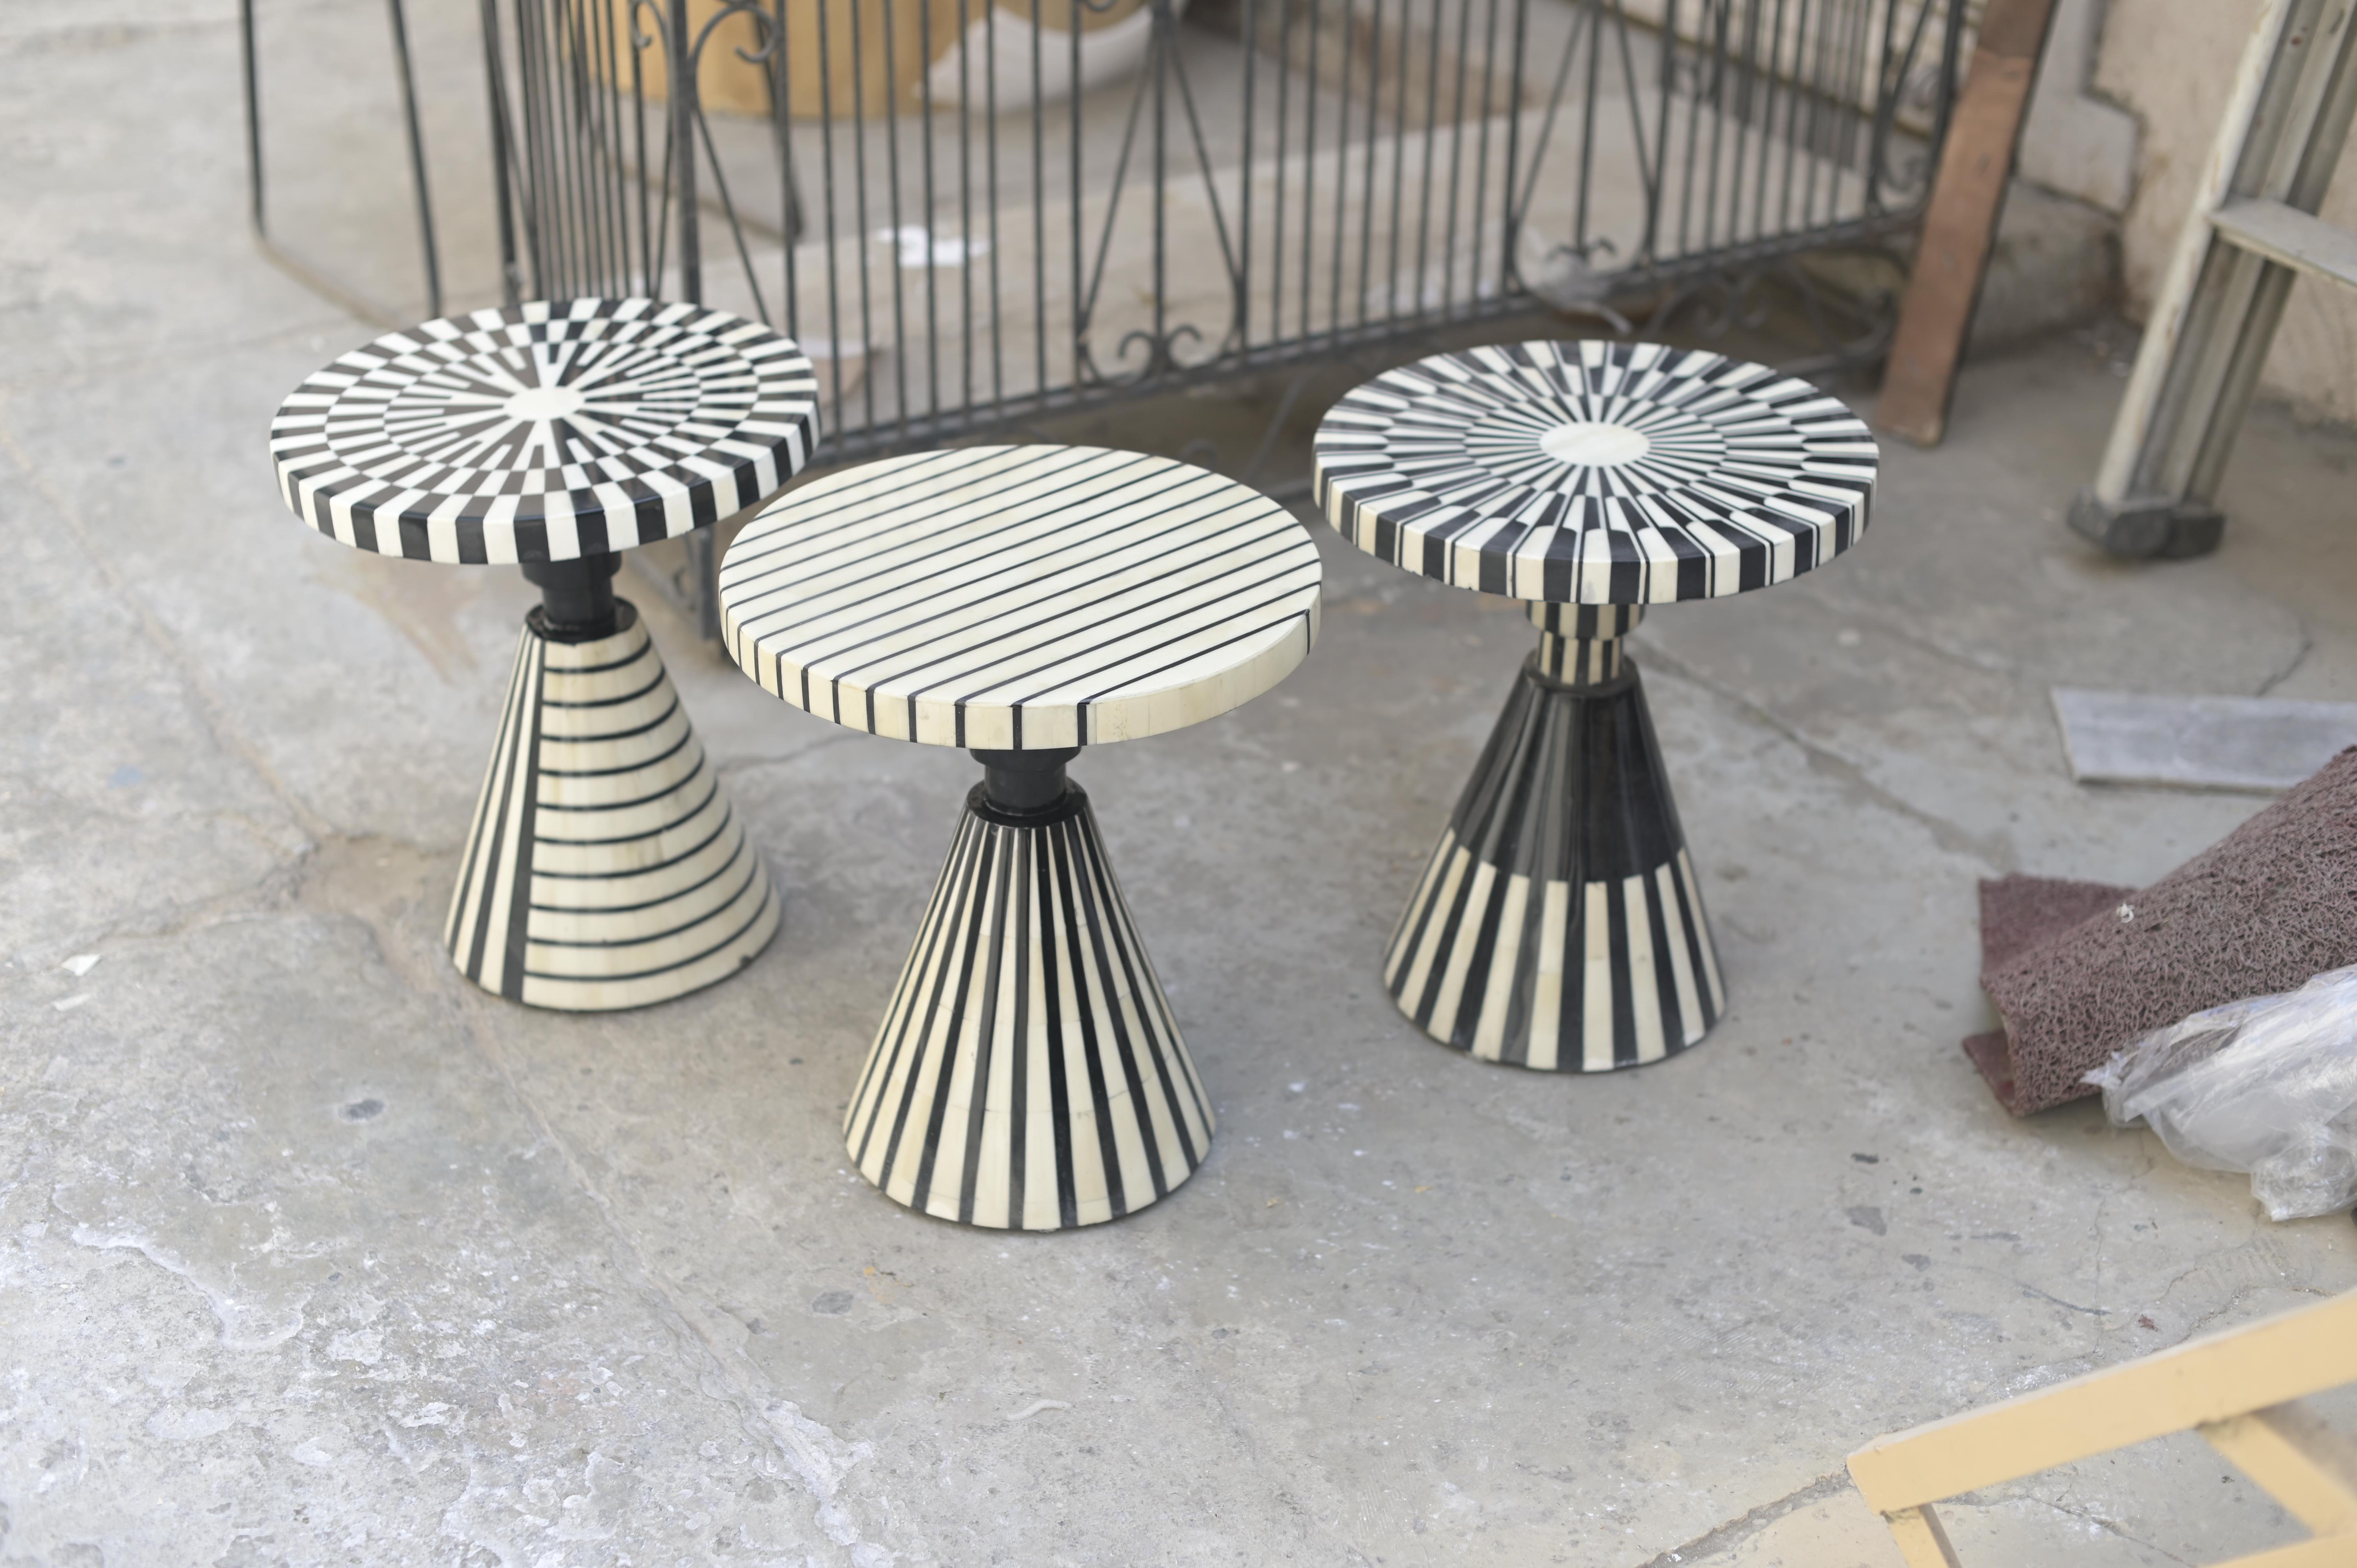 Art Nouveau Monochrome Black and White Dining Table with Matching Stools, 4 Piece Set For Sale